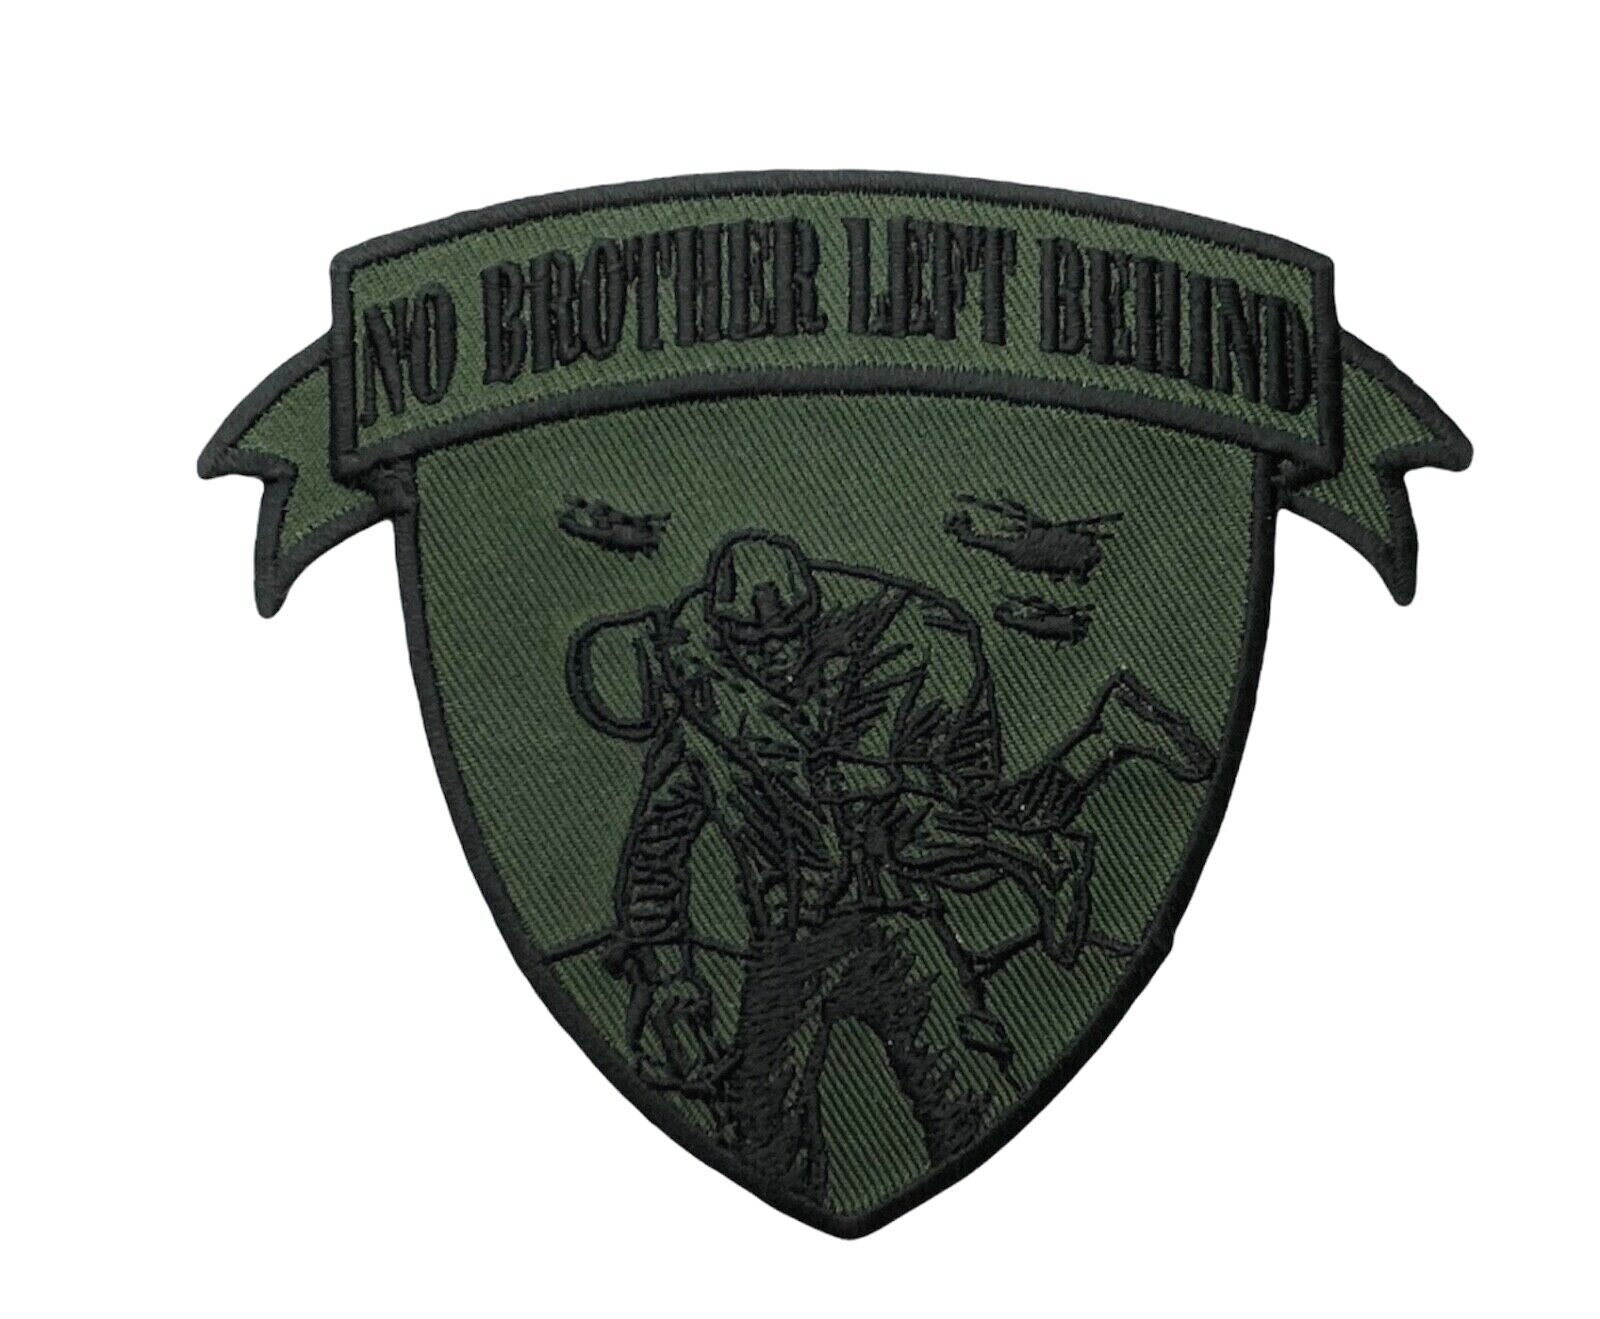 No Brother Left Behind Green Military 3.5 inch Patch IV4436 F6D32Q